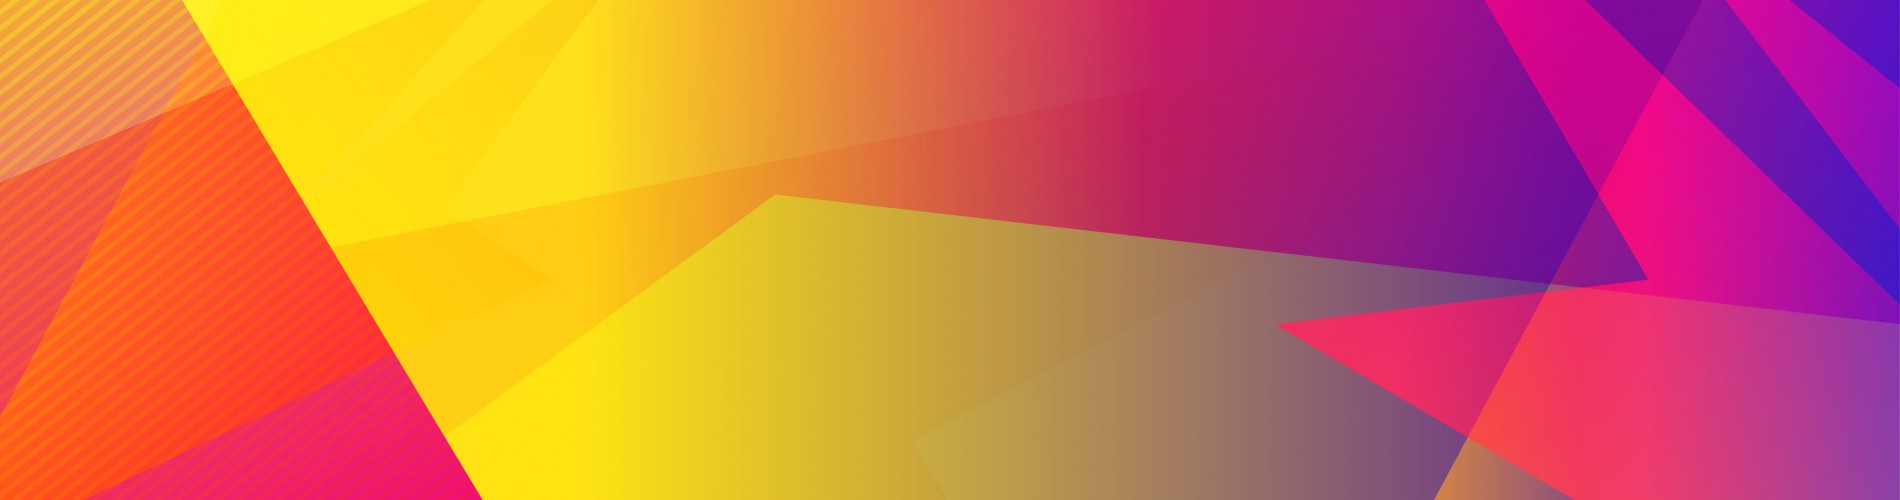 Yellow and purple abstract header image